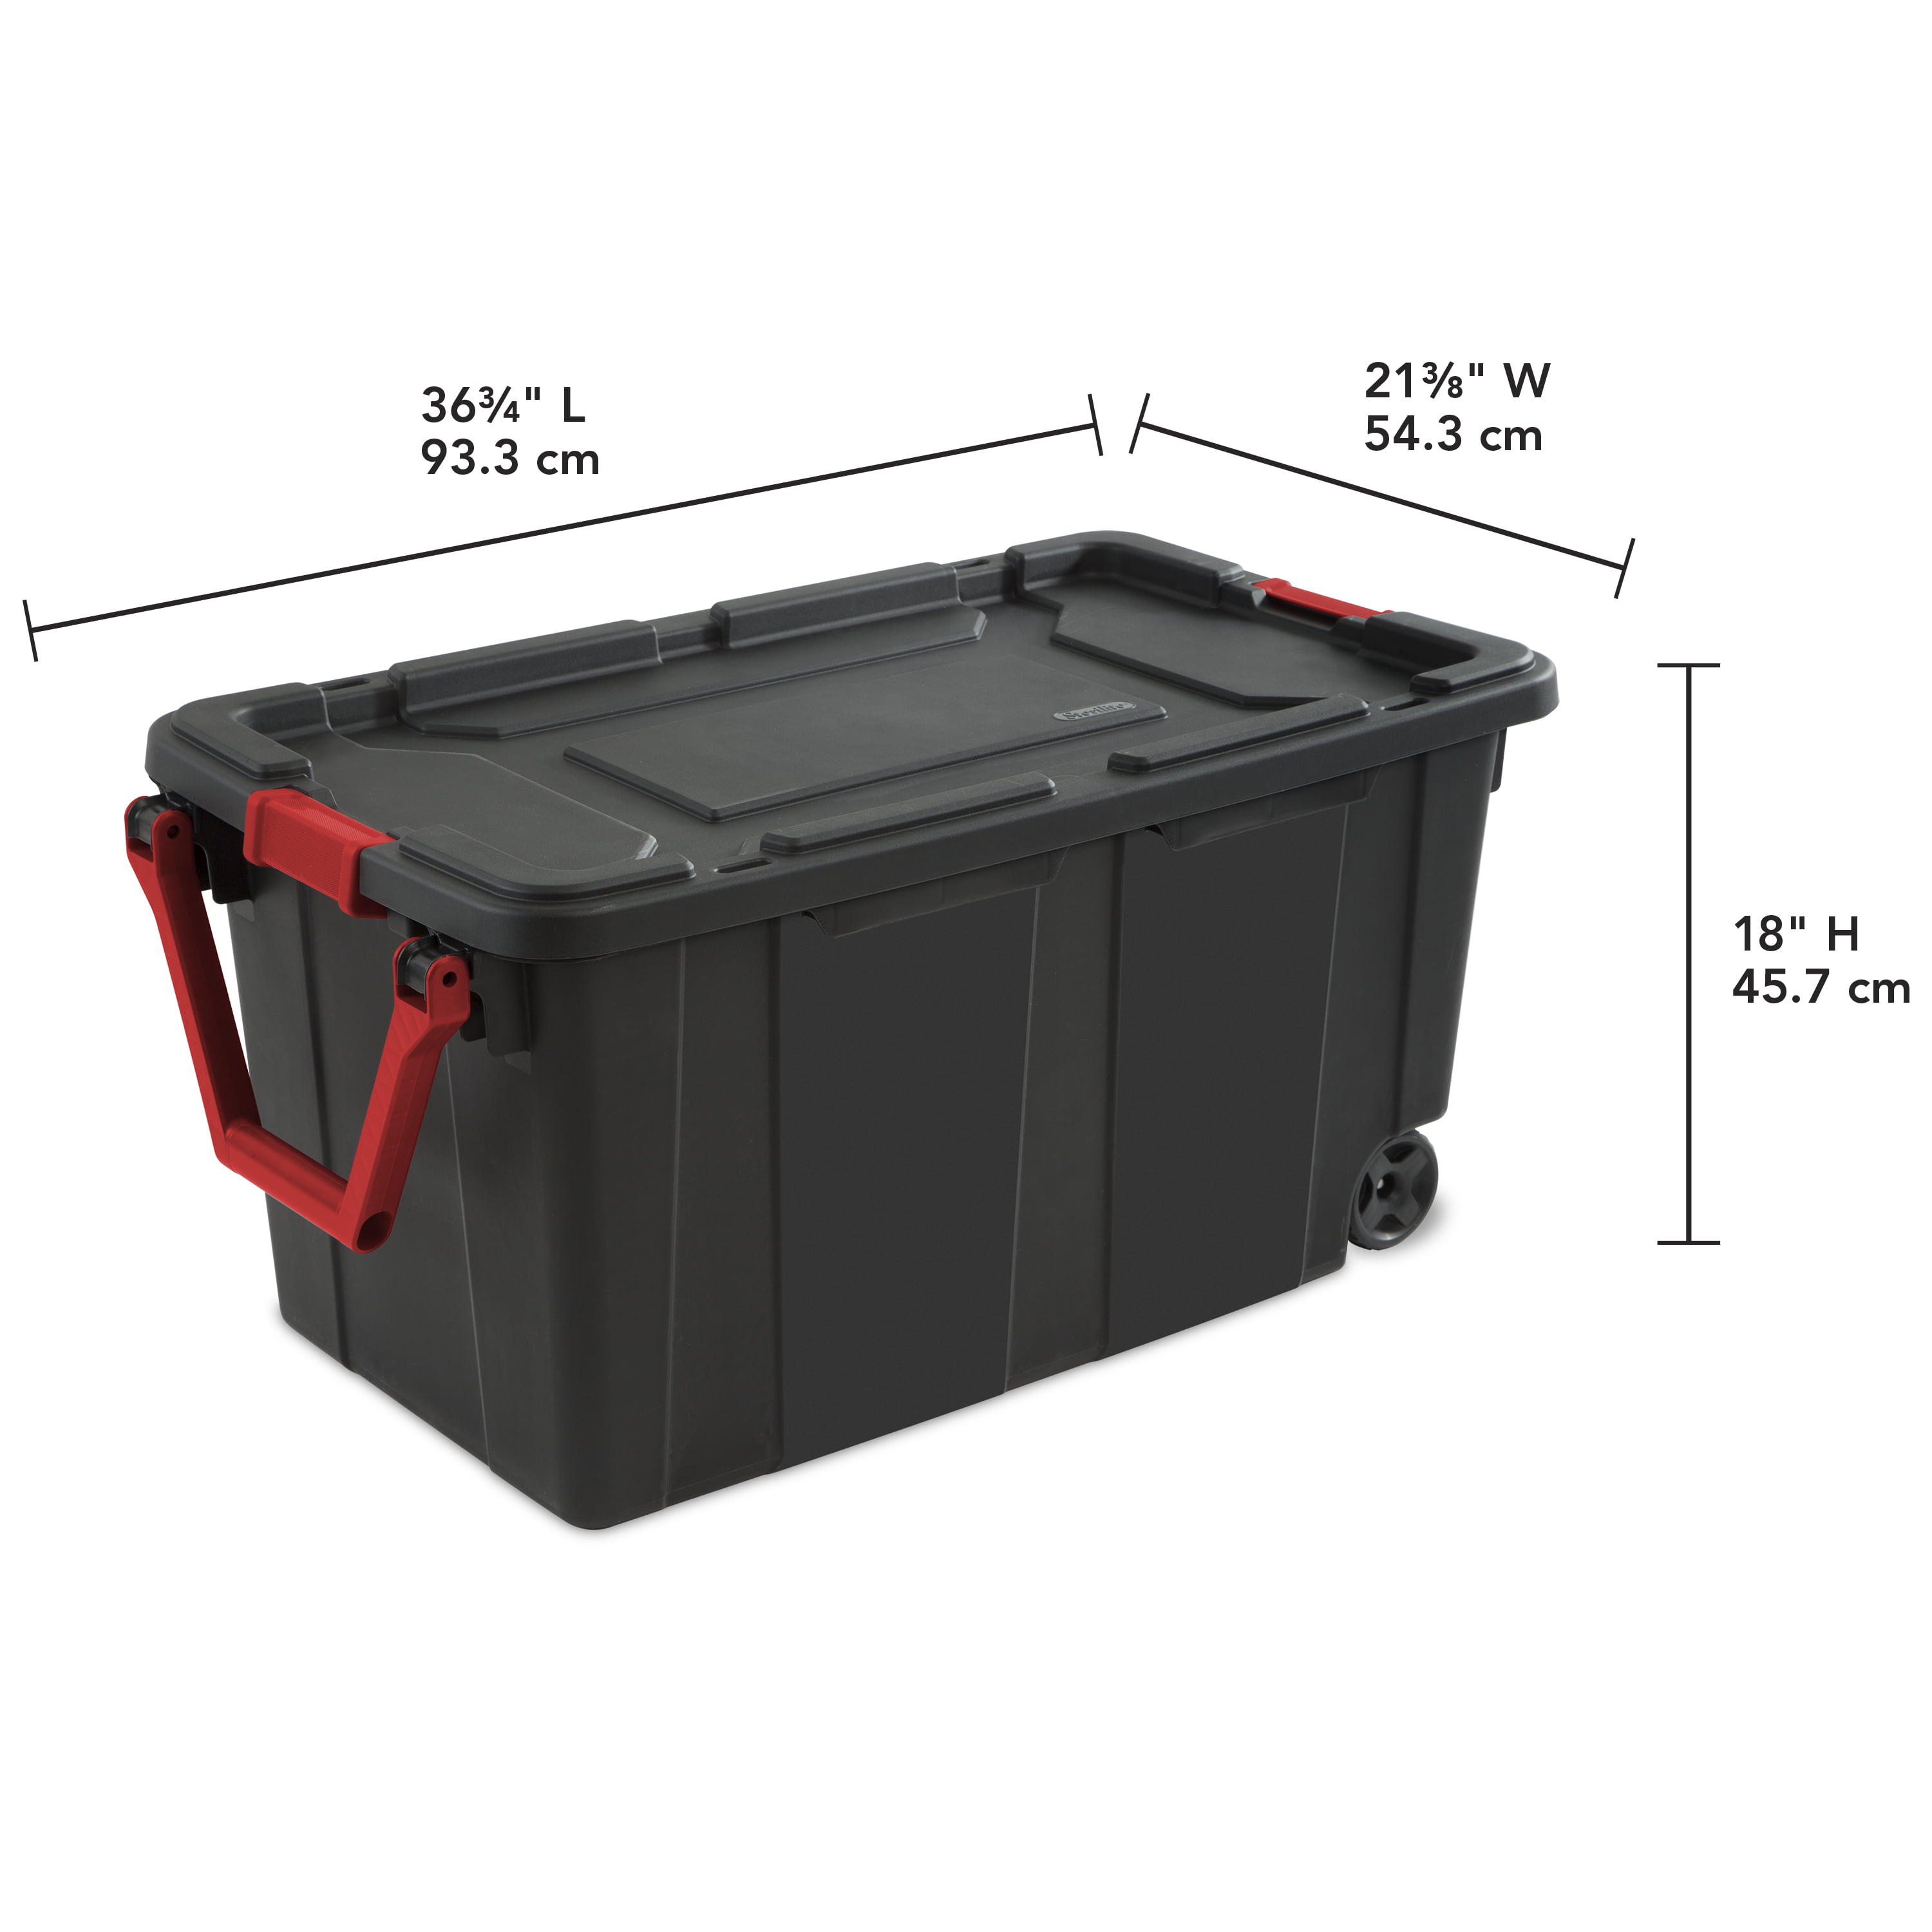 Heavy Duty Tool Container Rolling Storage Trunk/Bin 2 Pack Black -NEW 841342100665 | eBay